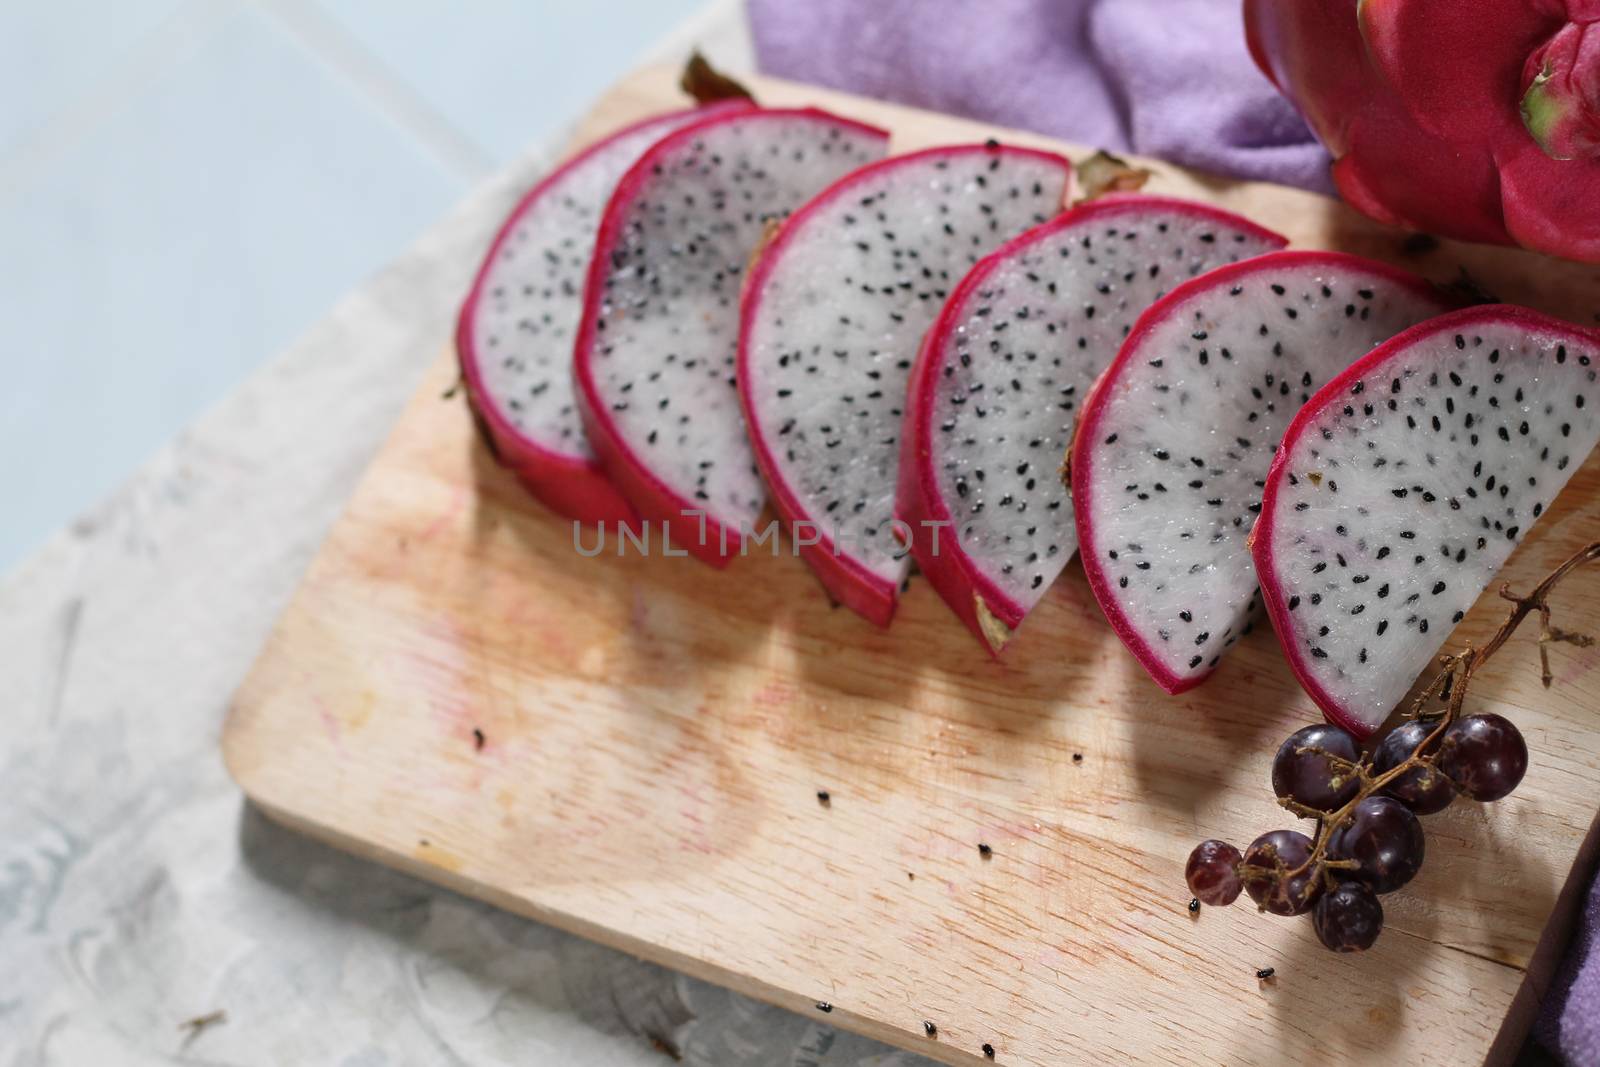 Sliced dragon fruit also known as Pitaya blanca or white-fleshed pitaya by Sonnet15